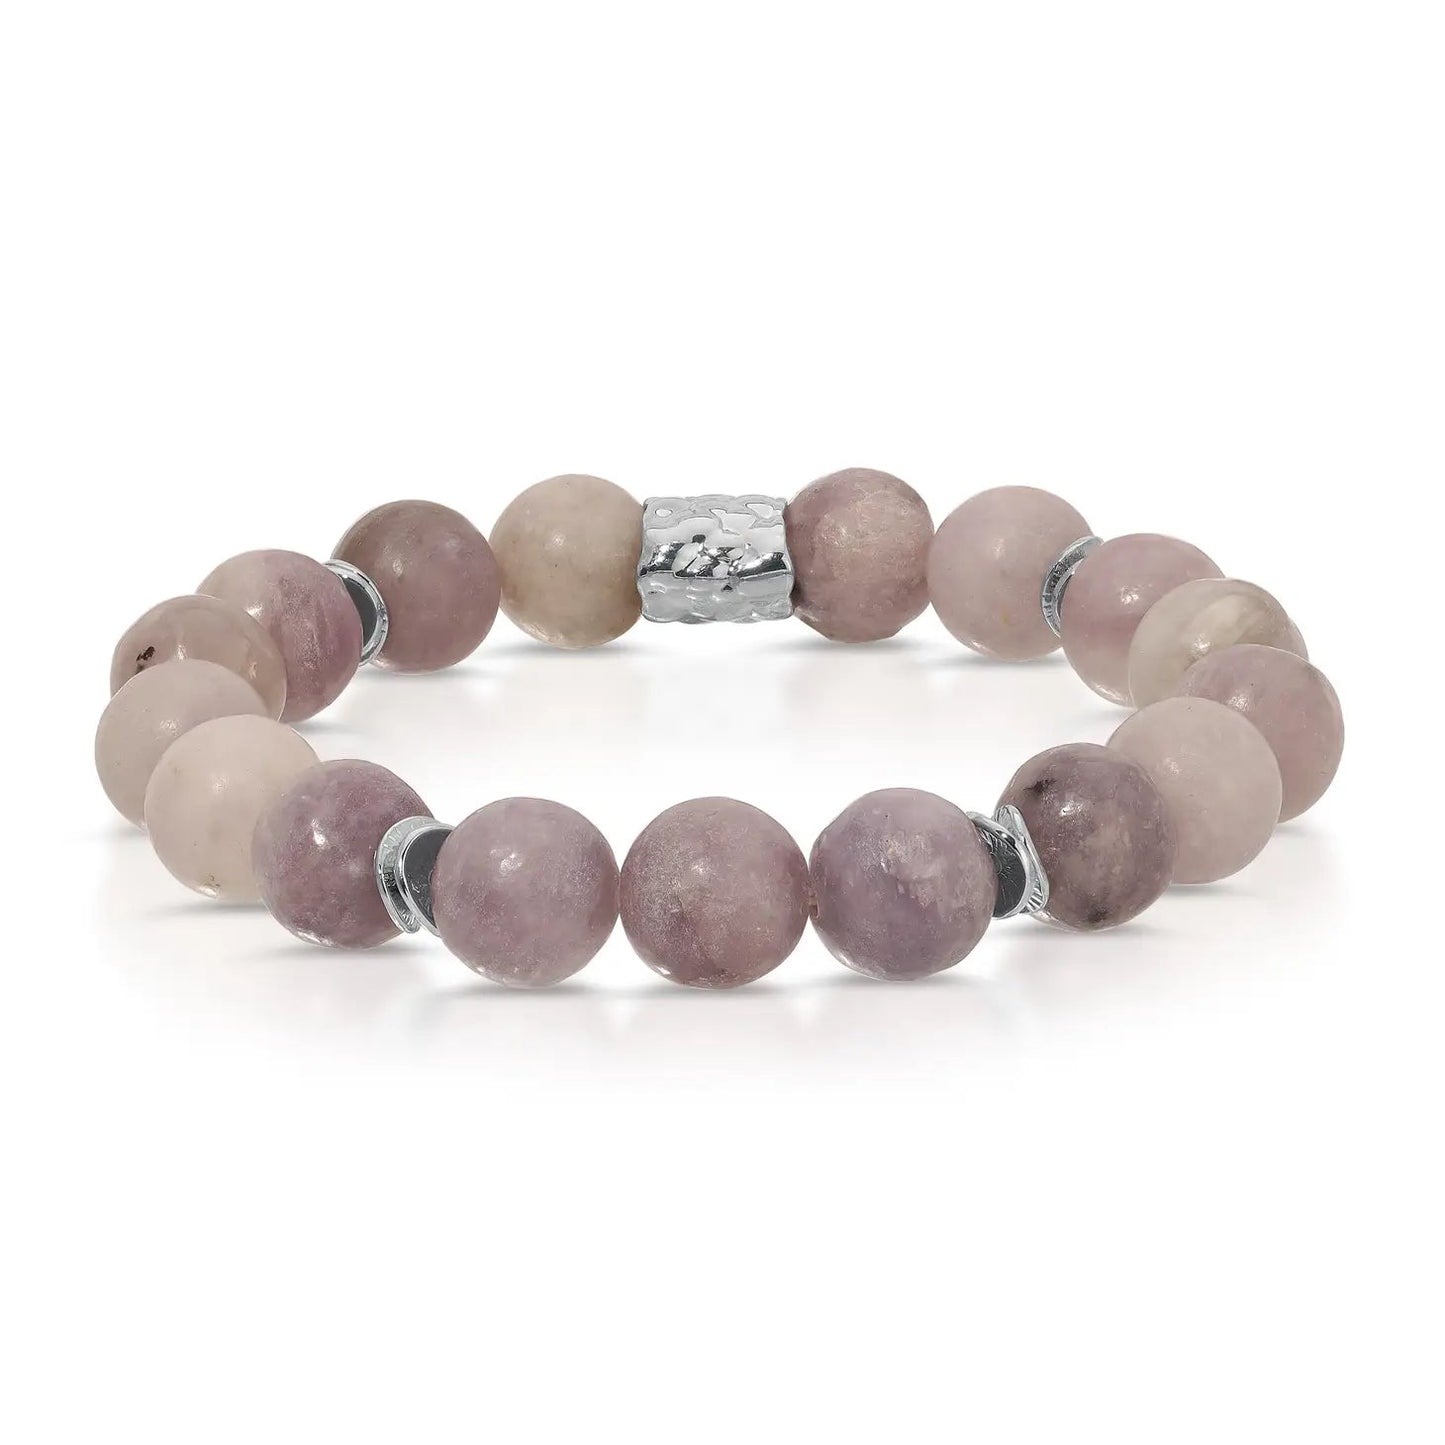 Lilac Jade - 10mm gemstone Bracelet - GB1271 - The Hare and the Moon